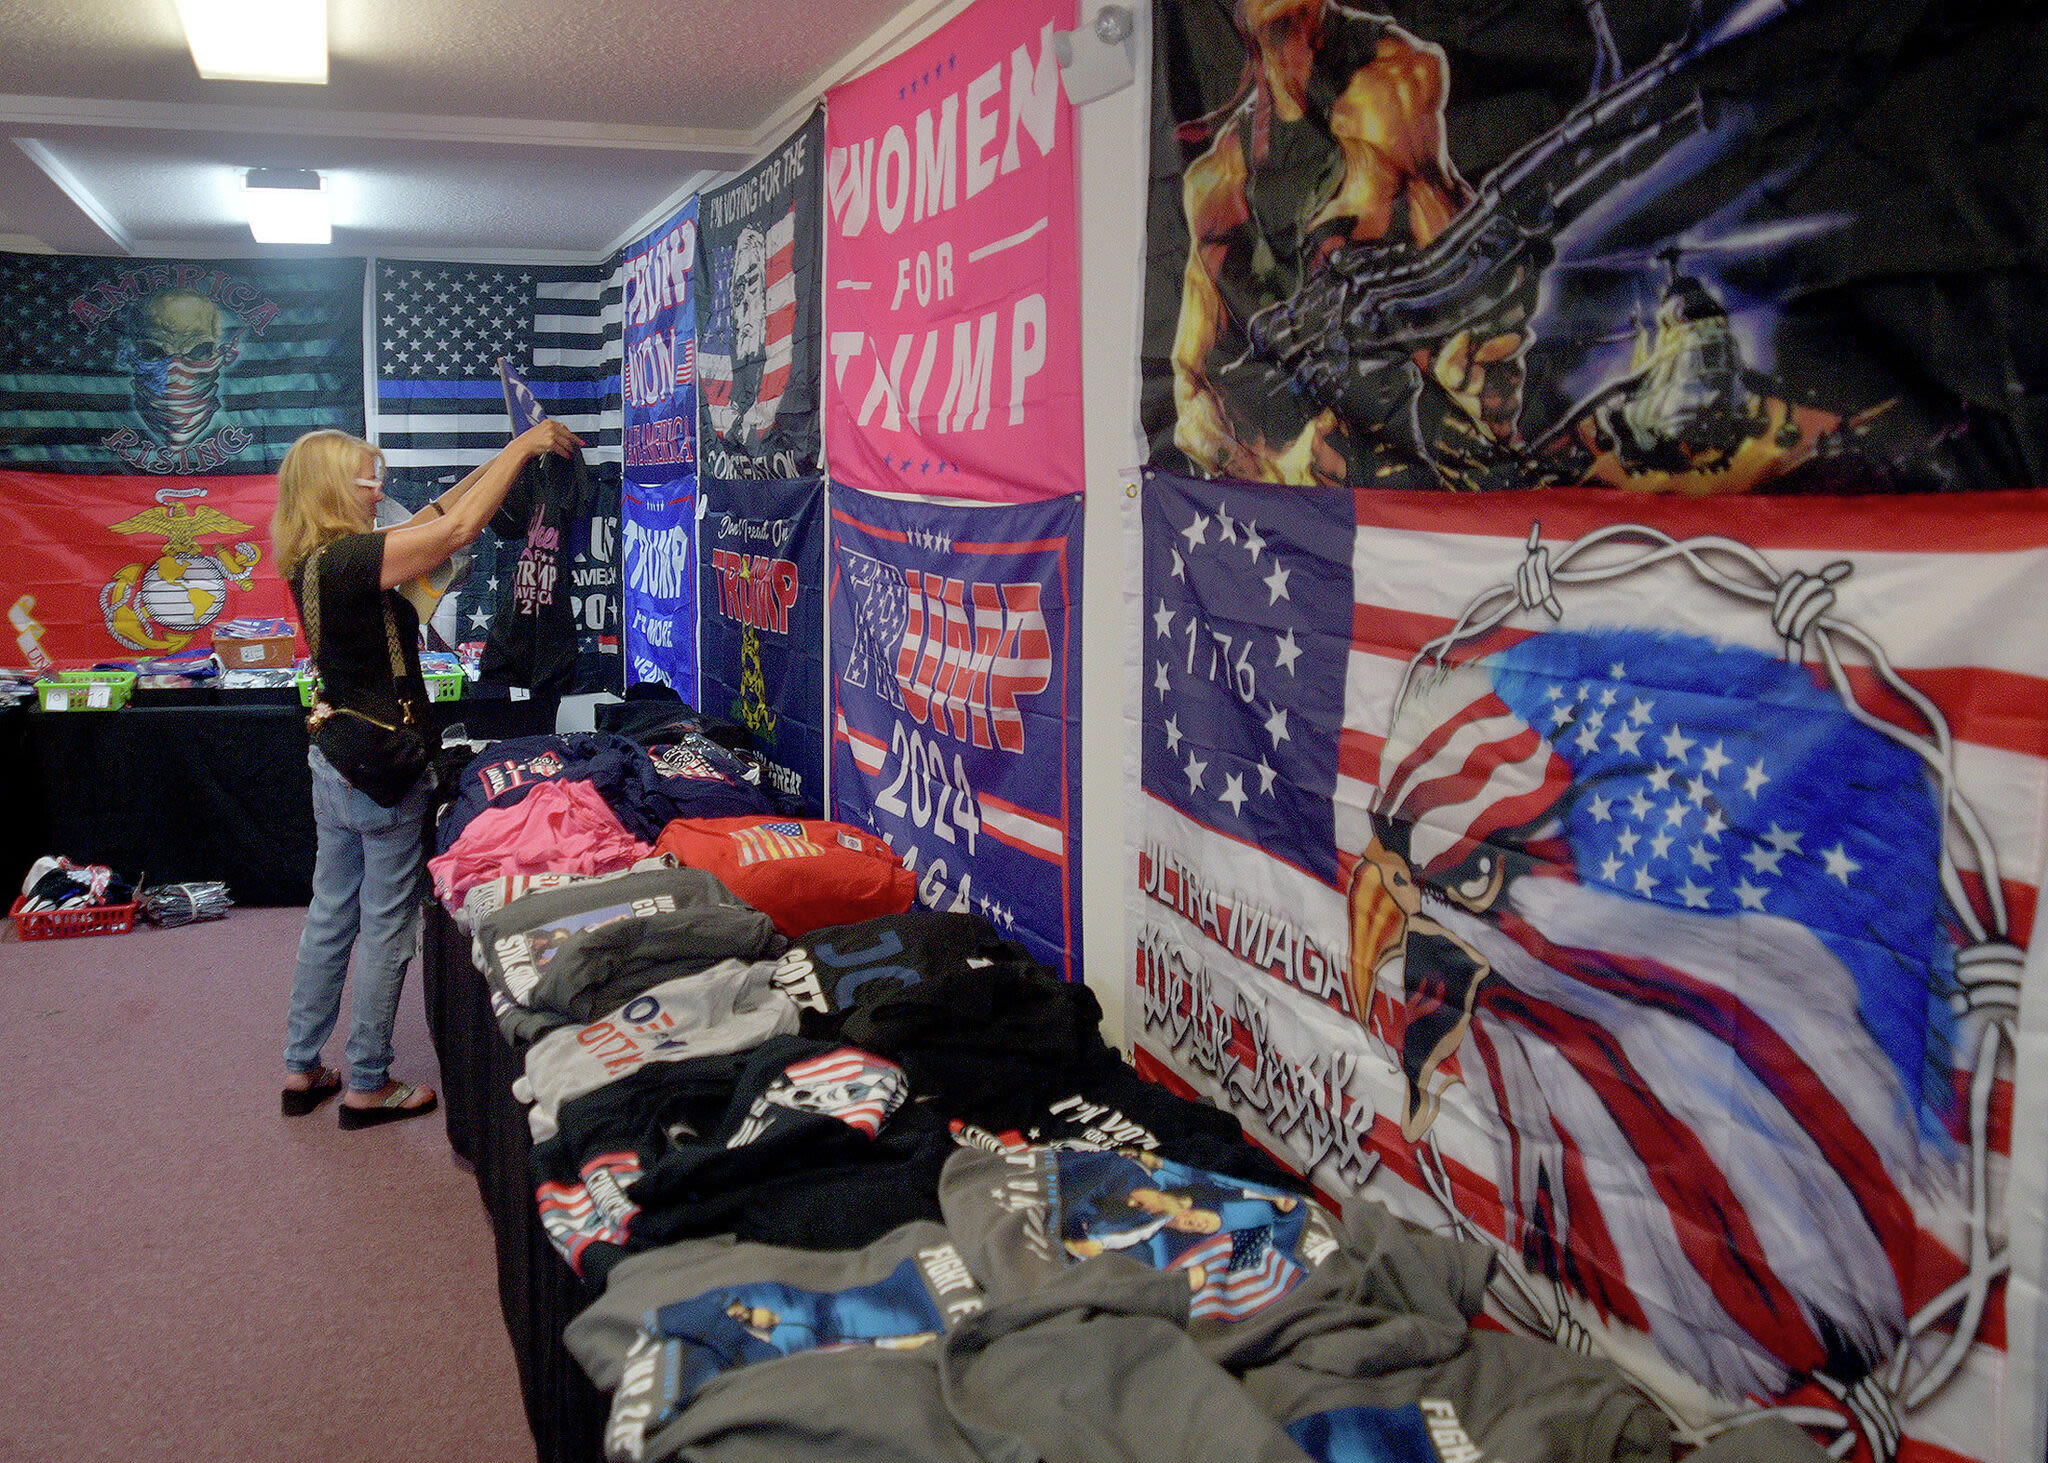 Trump paraphernalia store opens in Vernon, selling clothing, bobbleheads, stickers, and photos